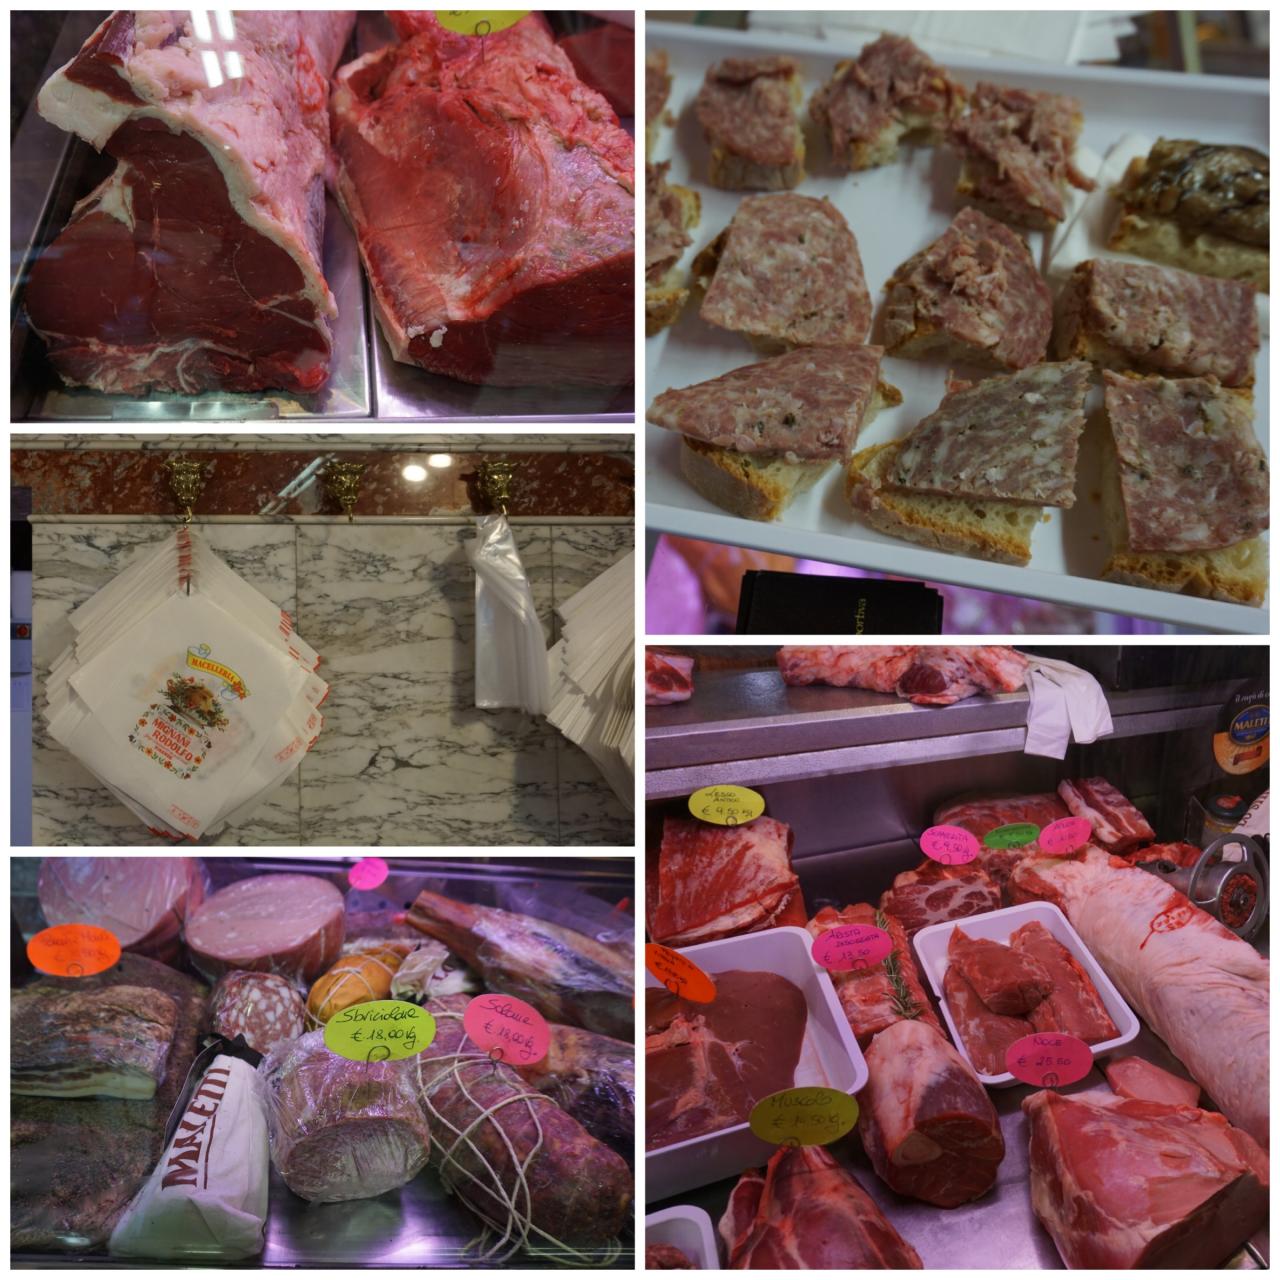 Fabulous bistecca, cold meats and other cuts at this wonderful old butcher shop